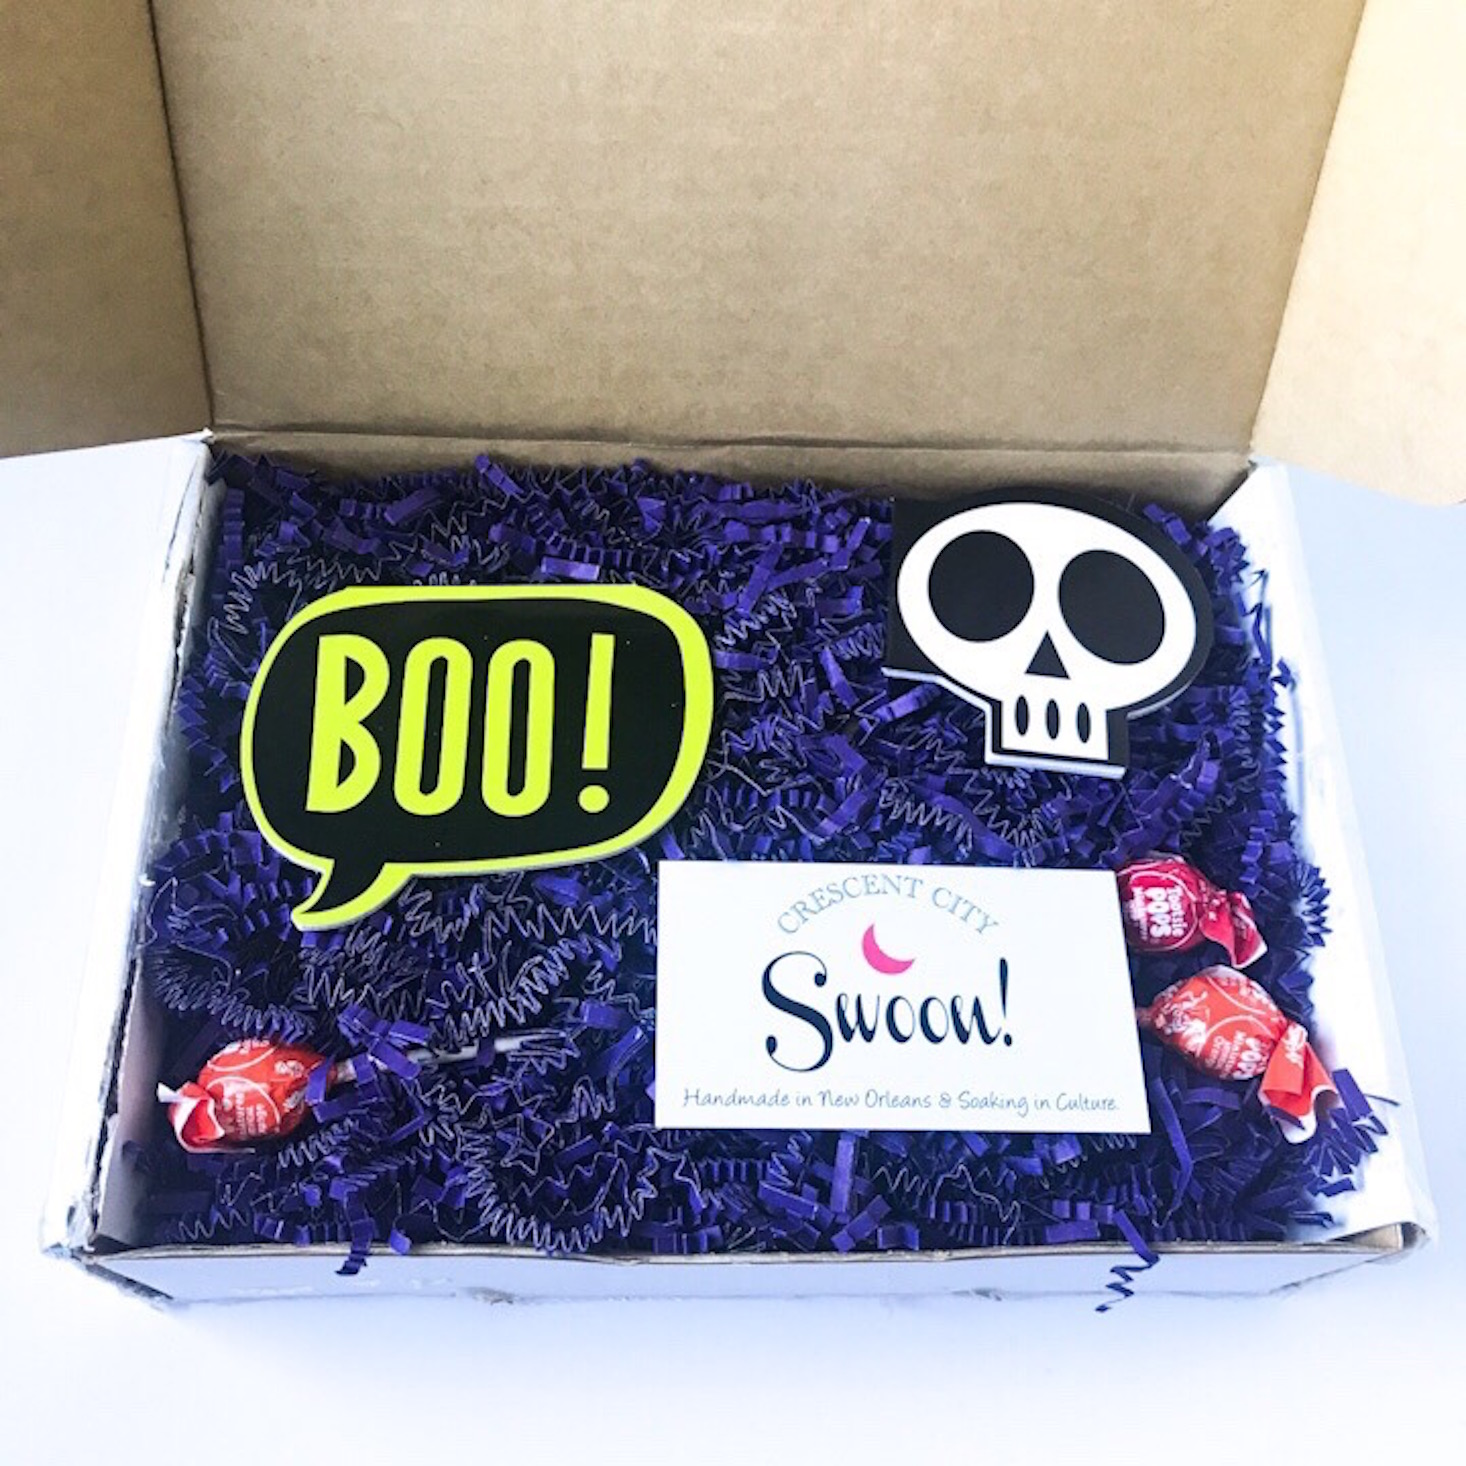 Crescent City Swoon Subscription Box Review – October 2018